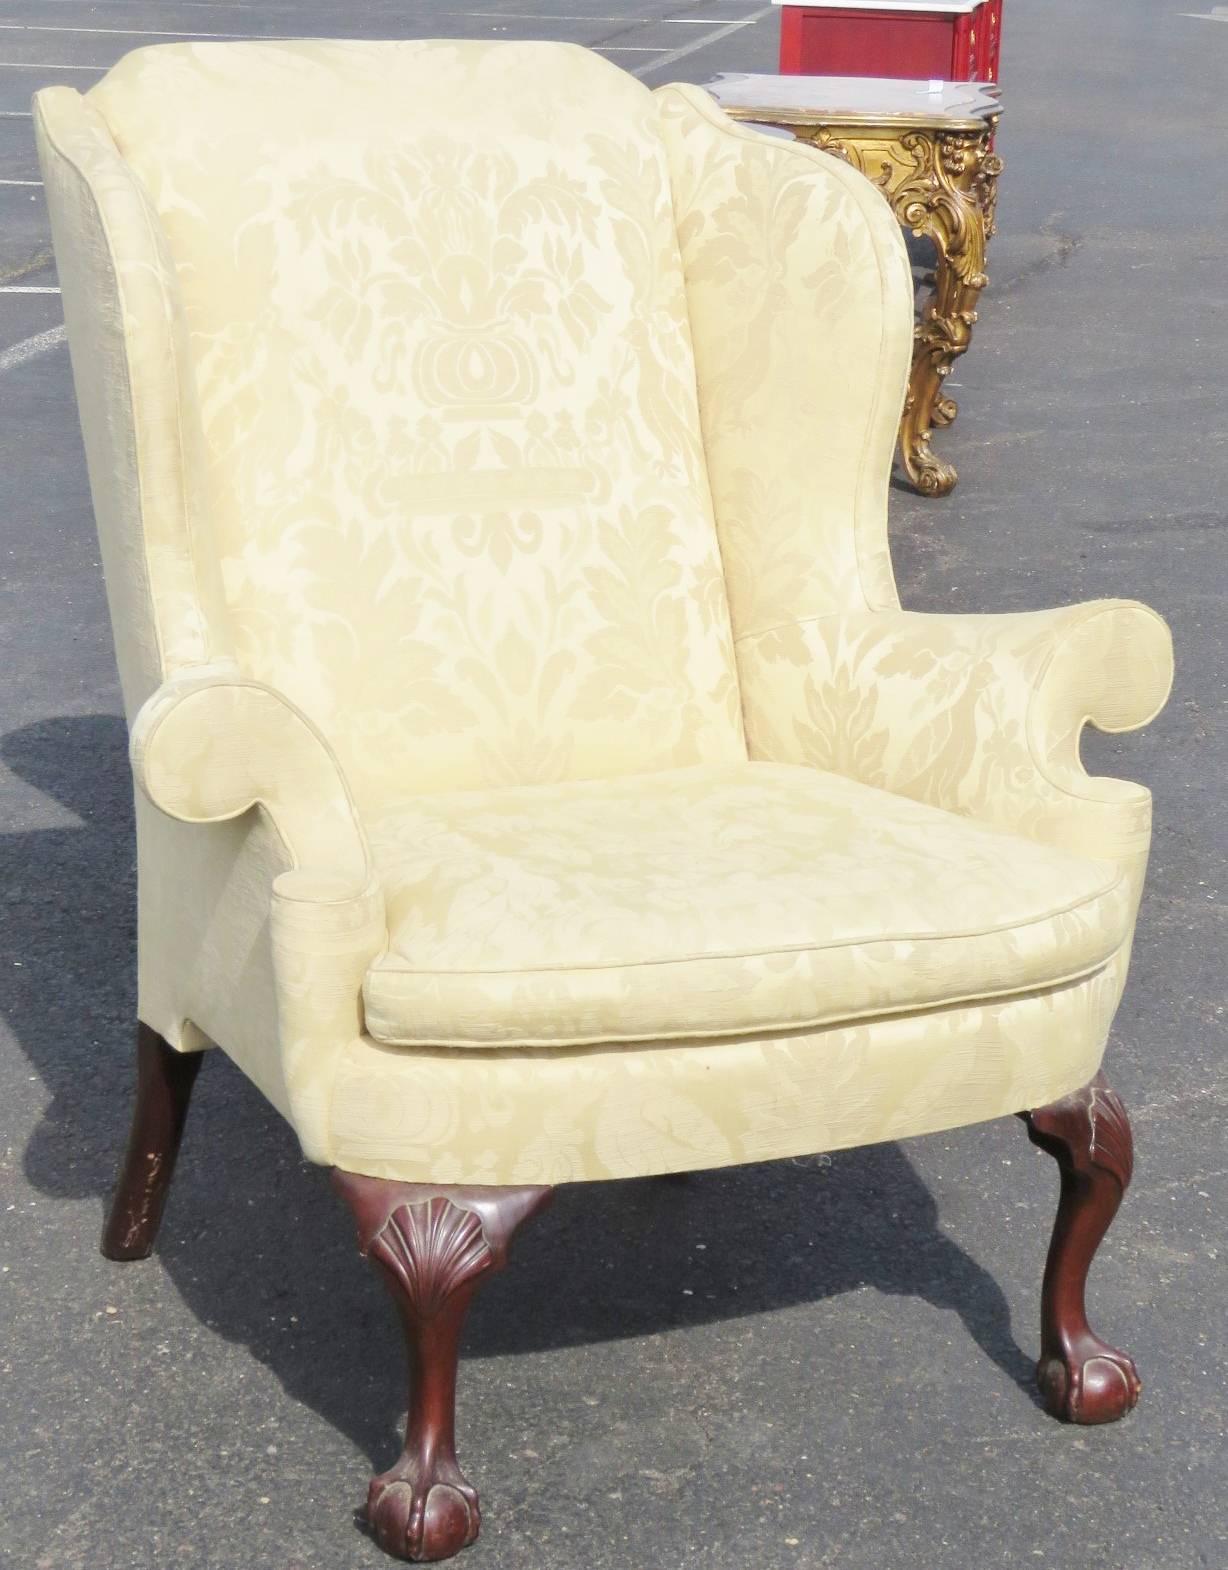 Carved ball and claw feet. Yellow damask upholstery.